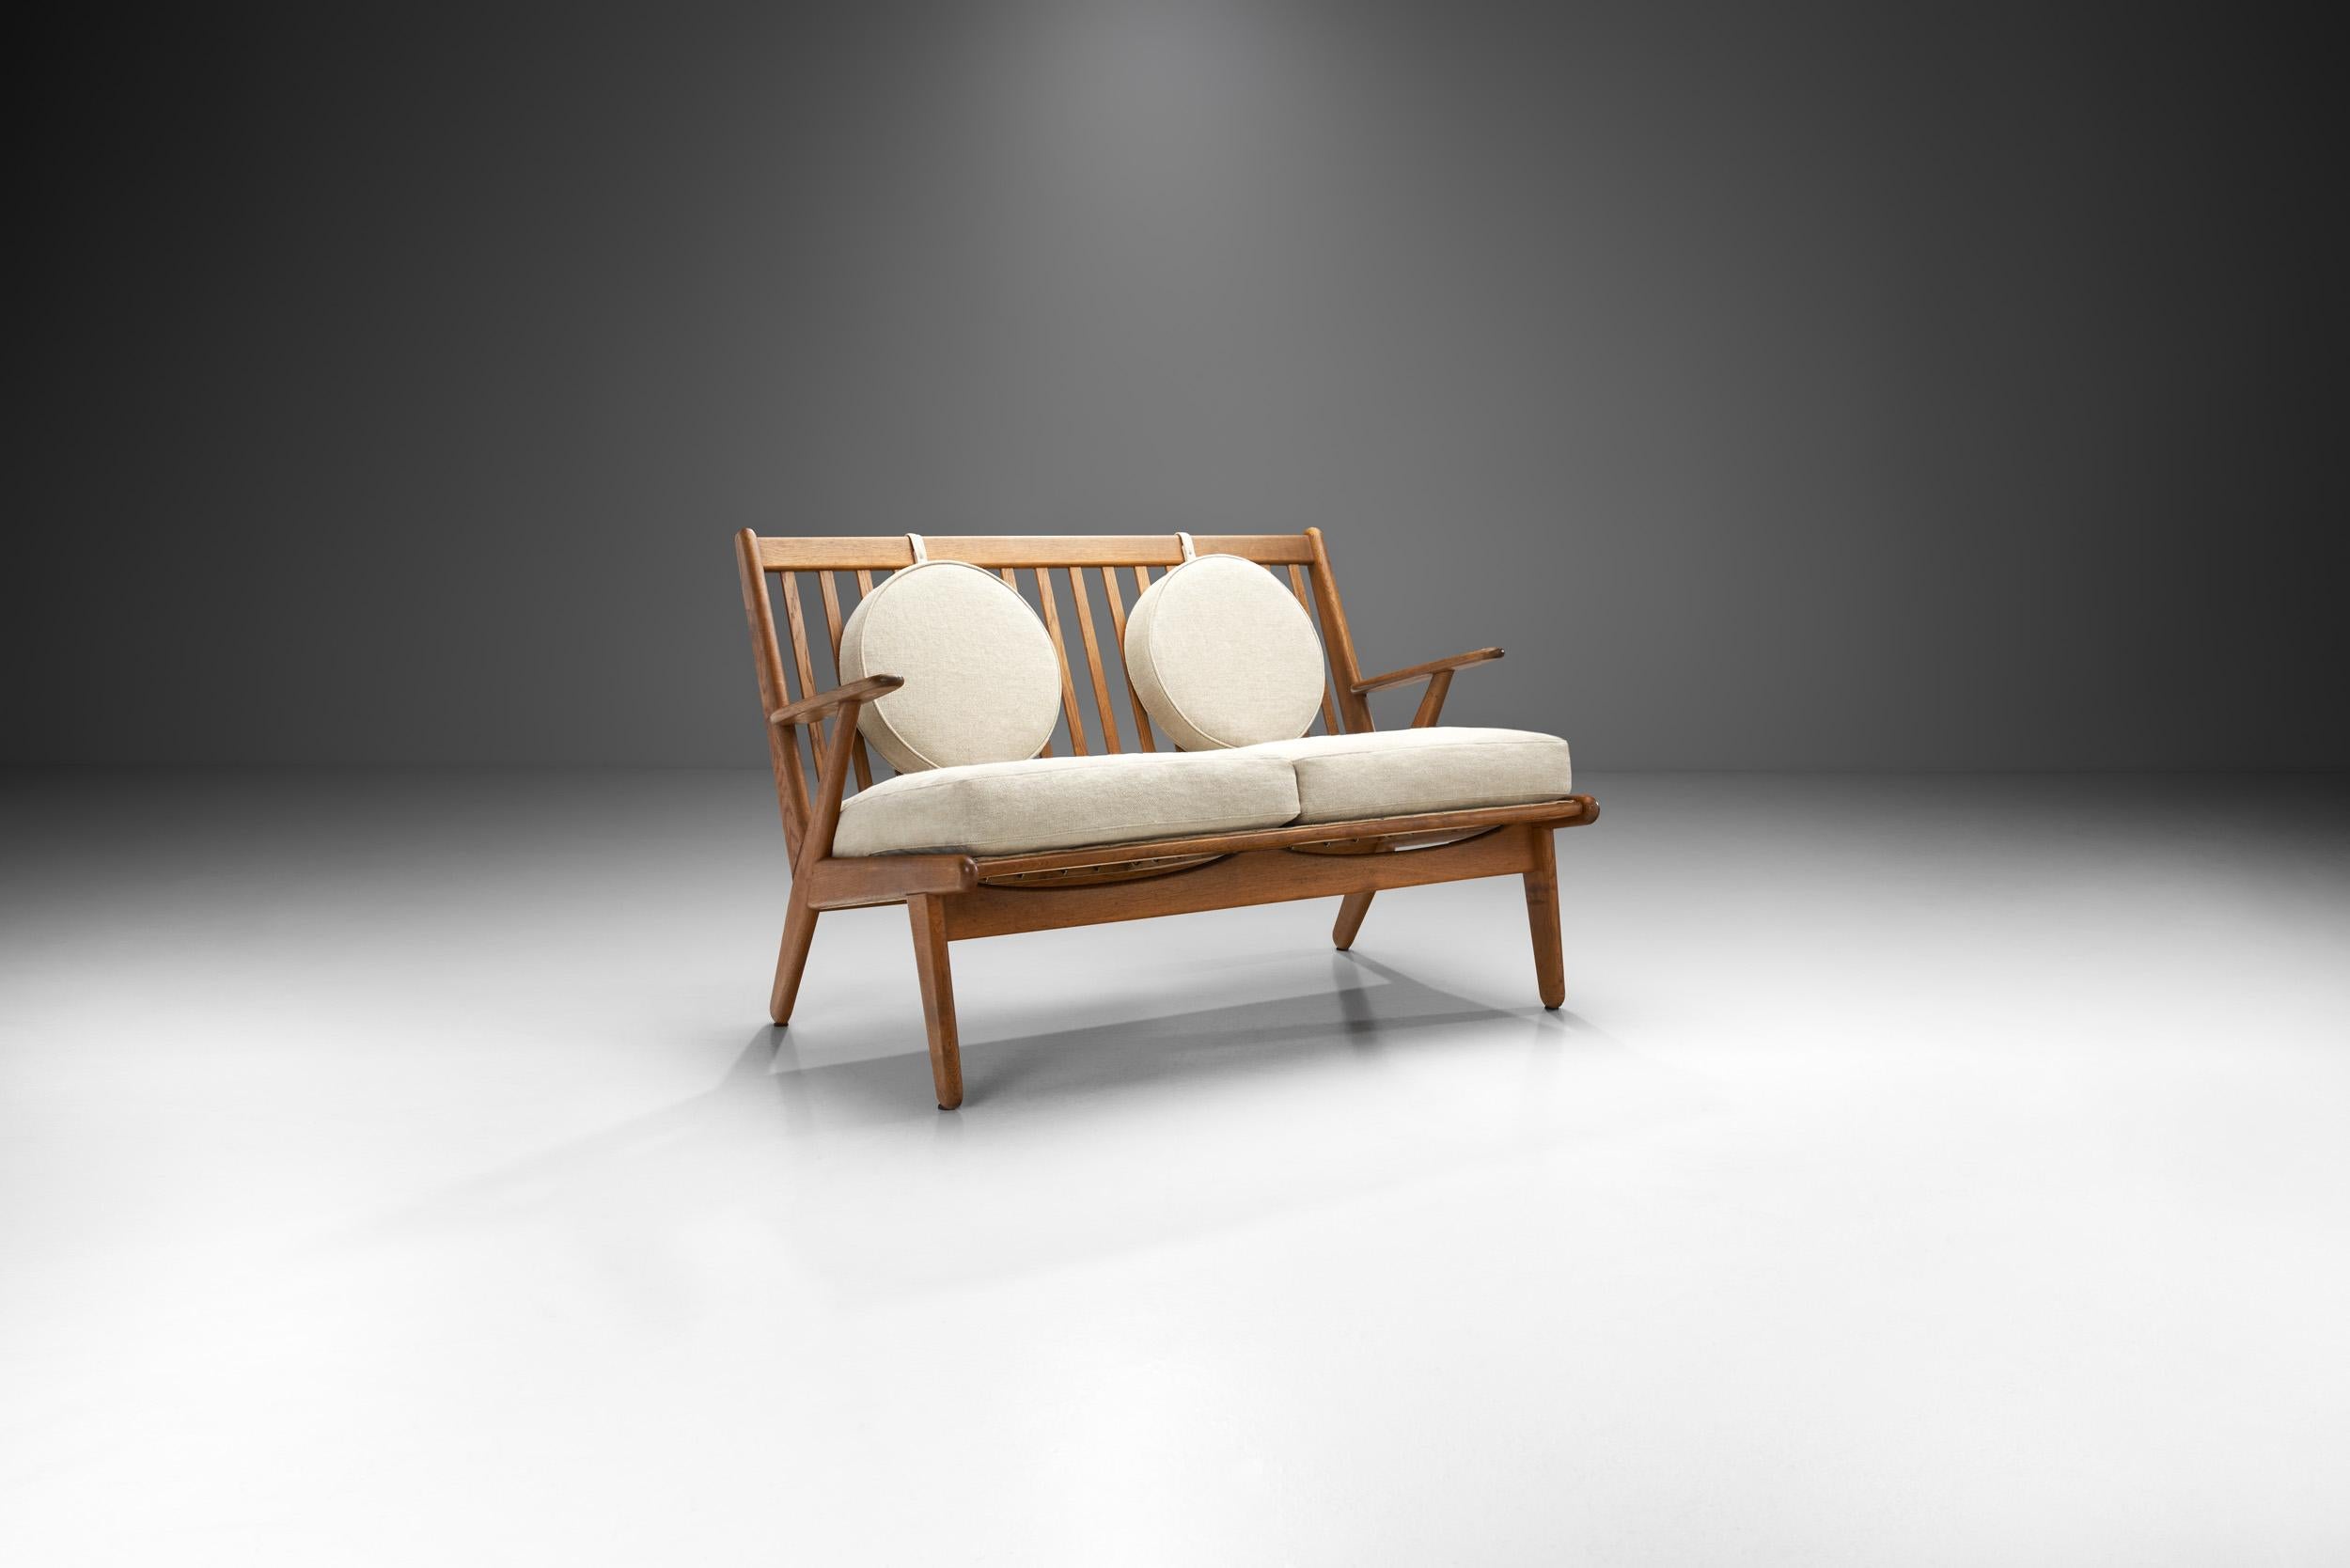 Reminiscent of the classic Windsor bench, this model is the Danish interpretation of the style. This two-seater bench blends high functionality, good quality natural materials, and subtle colours with simple lines, elegance and excellent